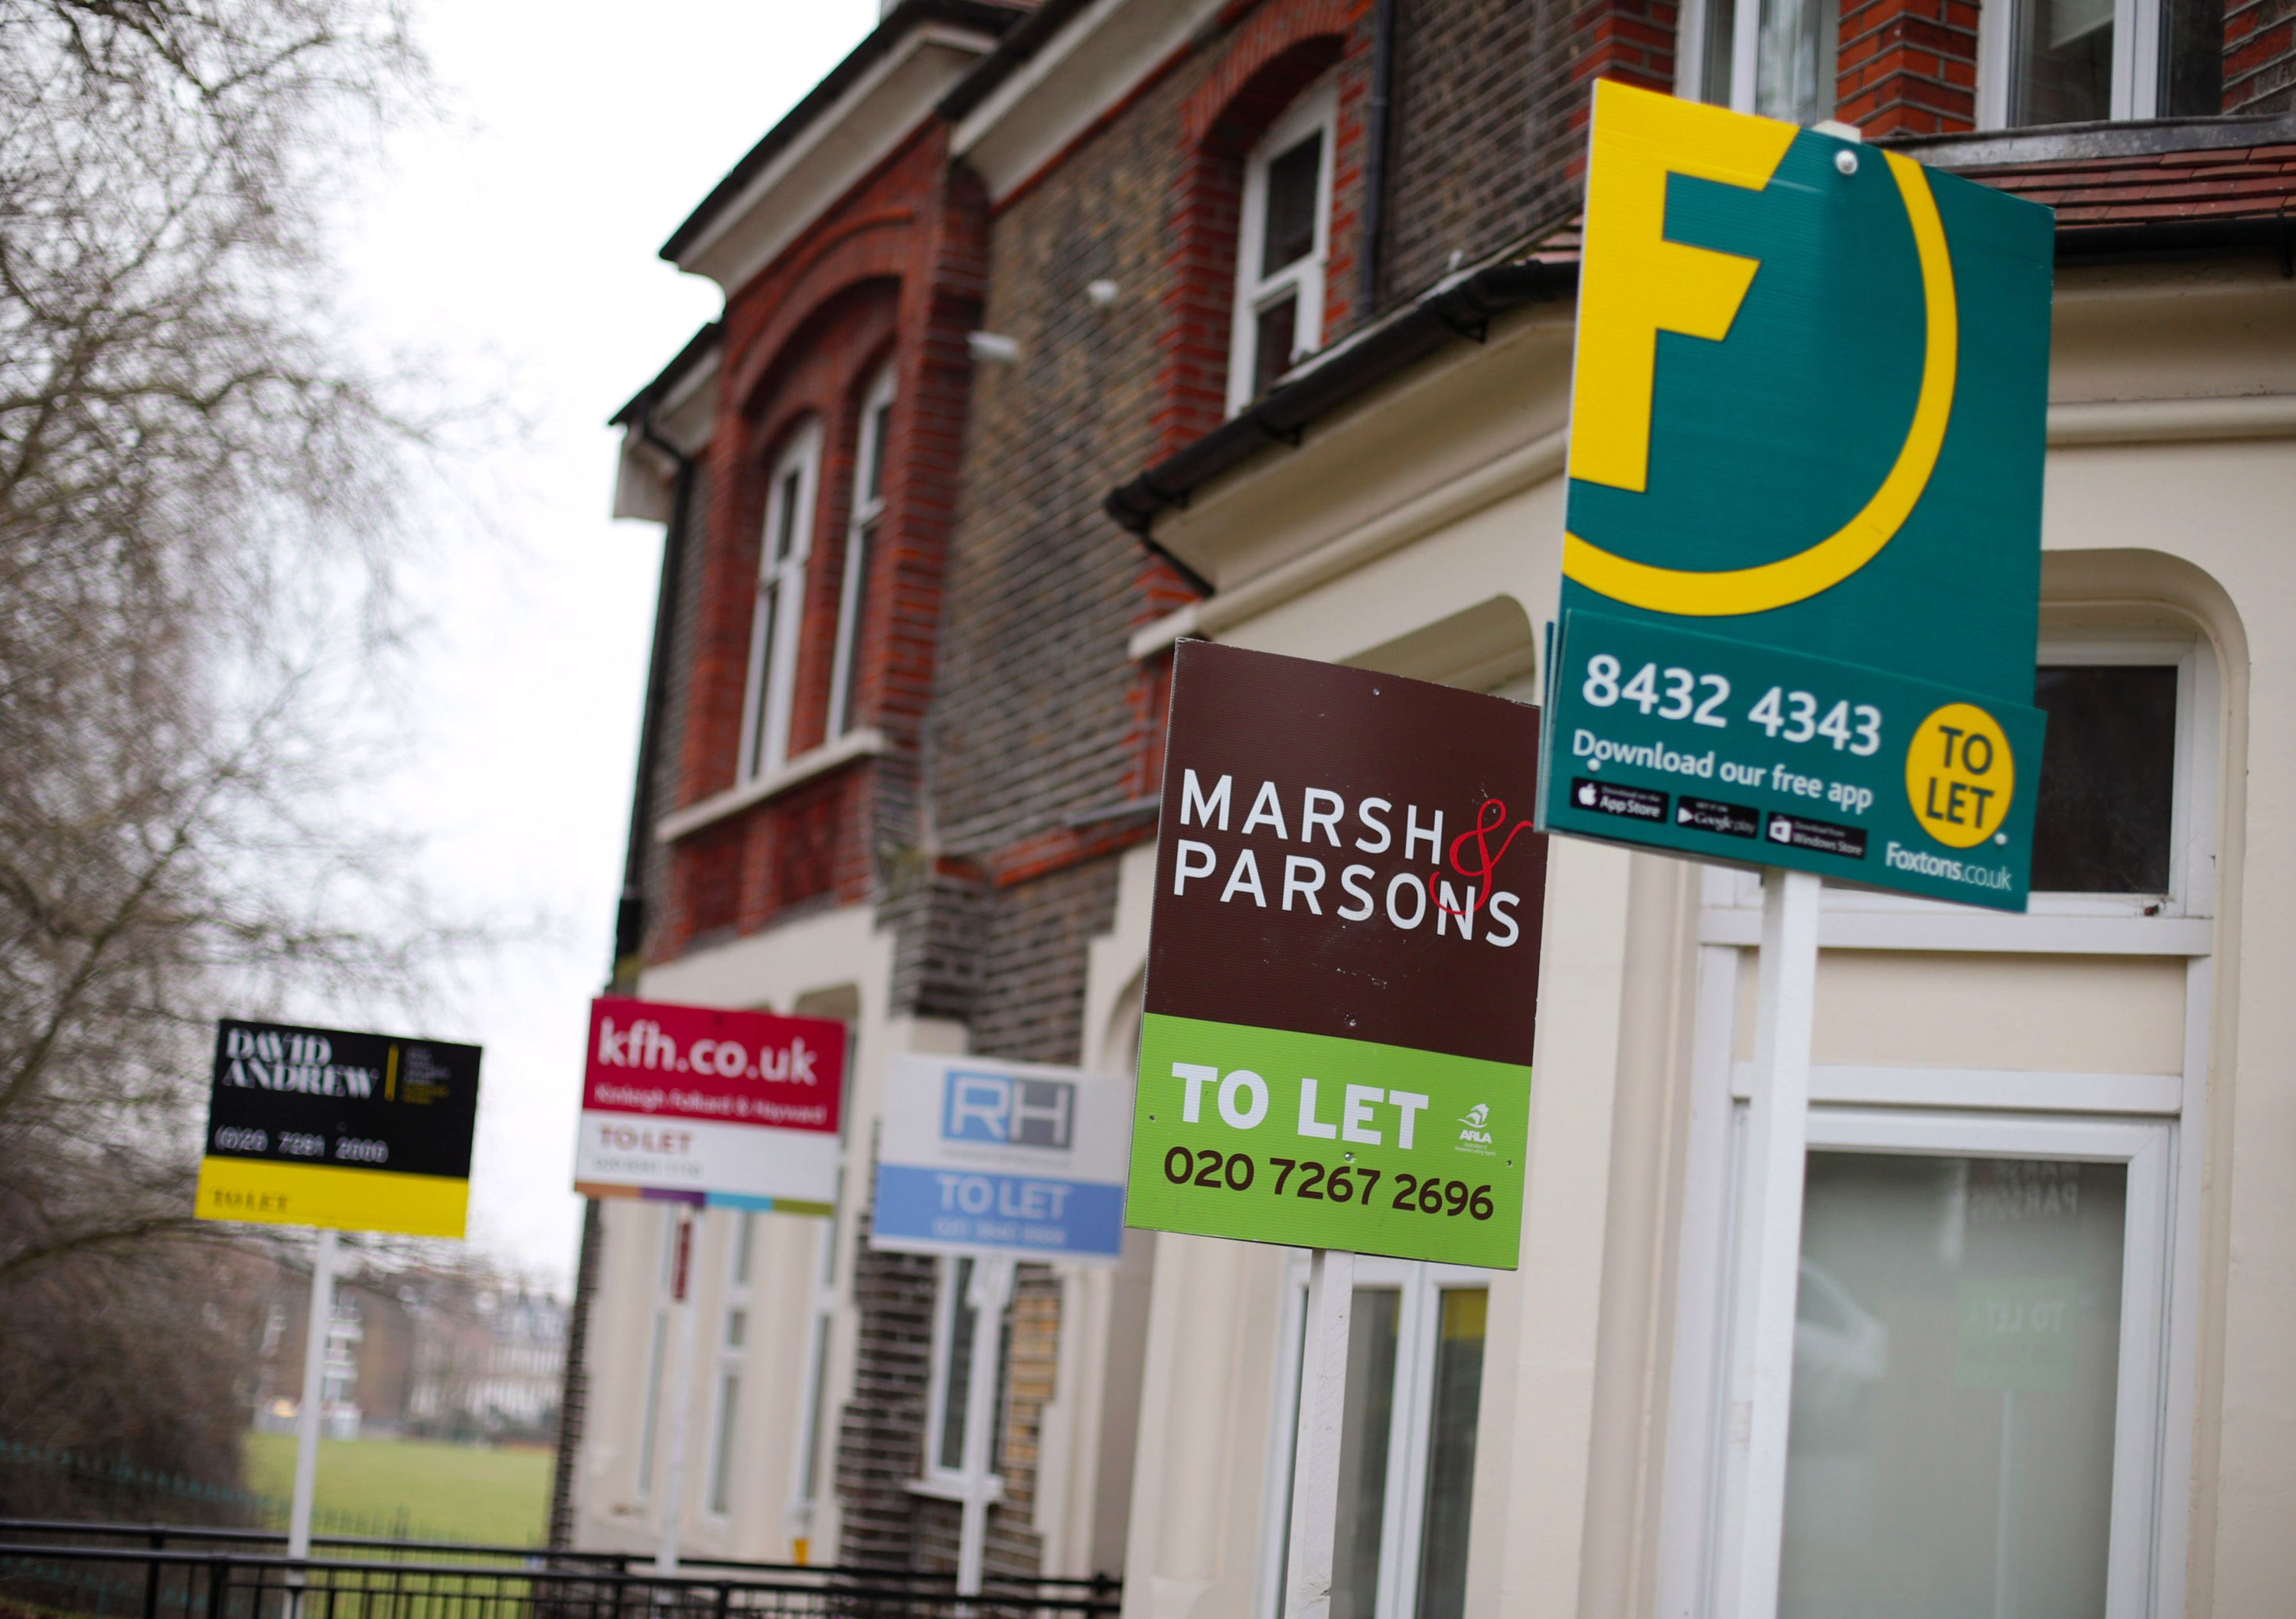 Escalating house prices have taken home ownership out of the reach of many Britons